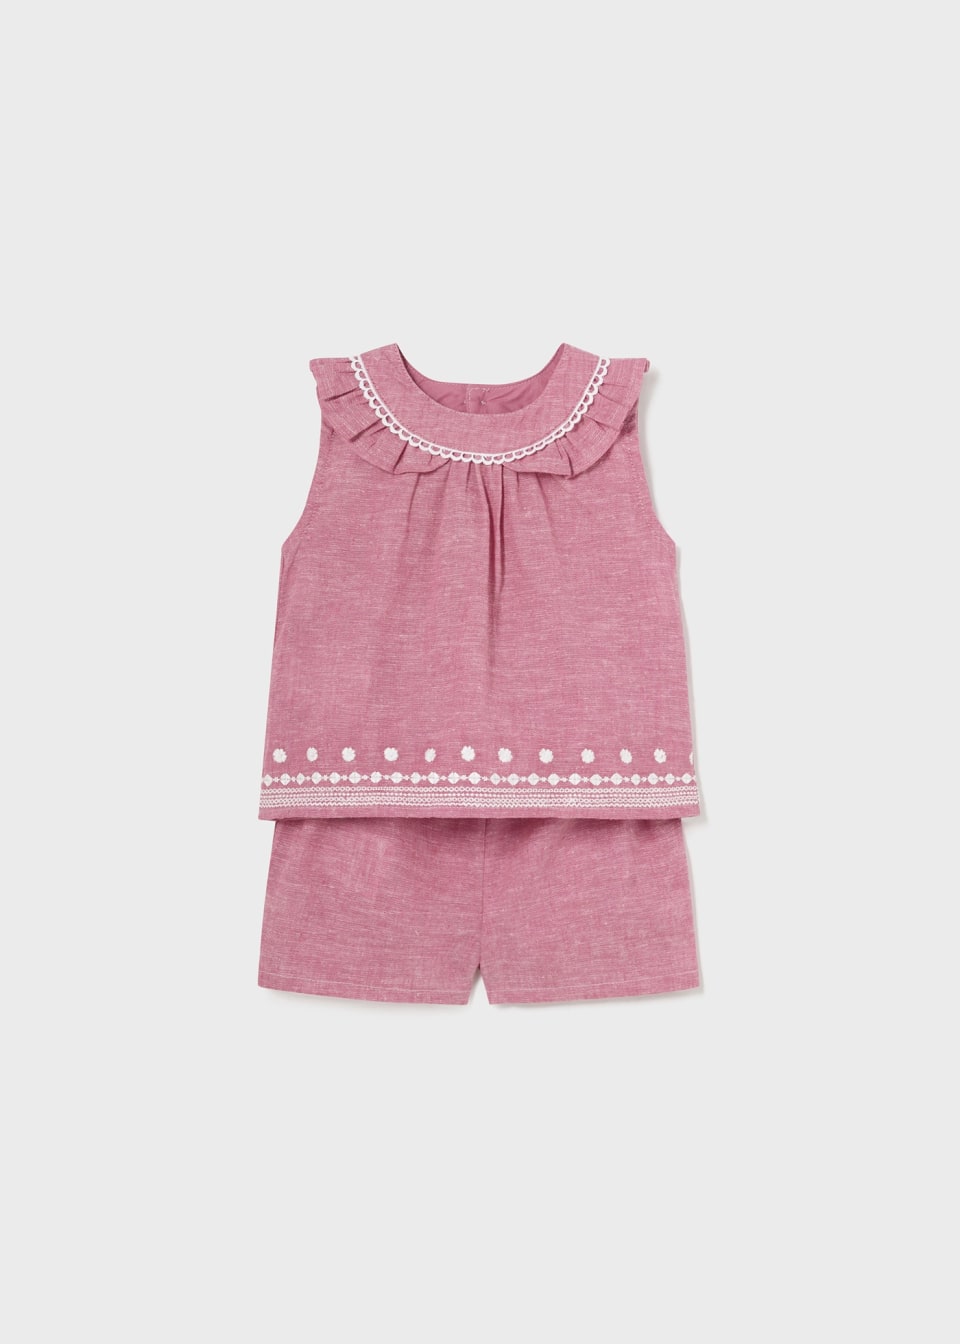 Baby embroidered pink linen top & shorts set